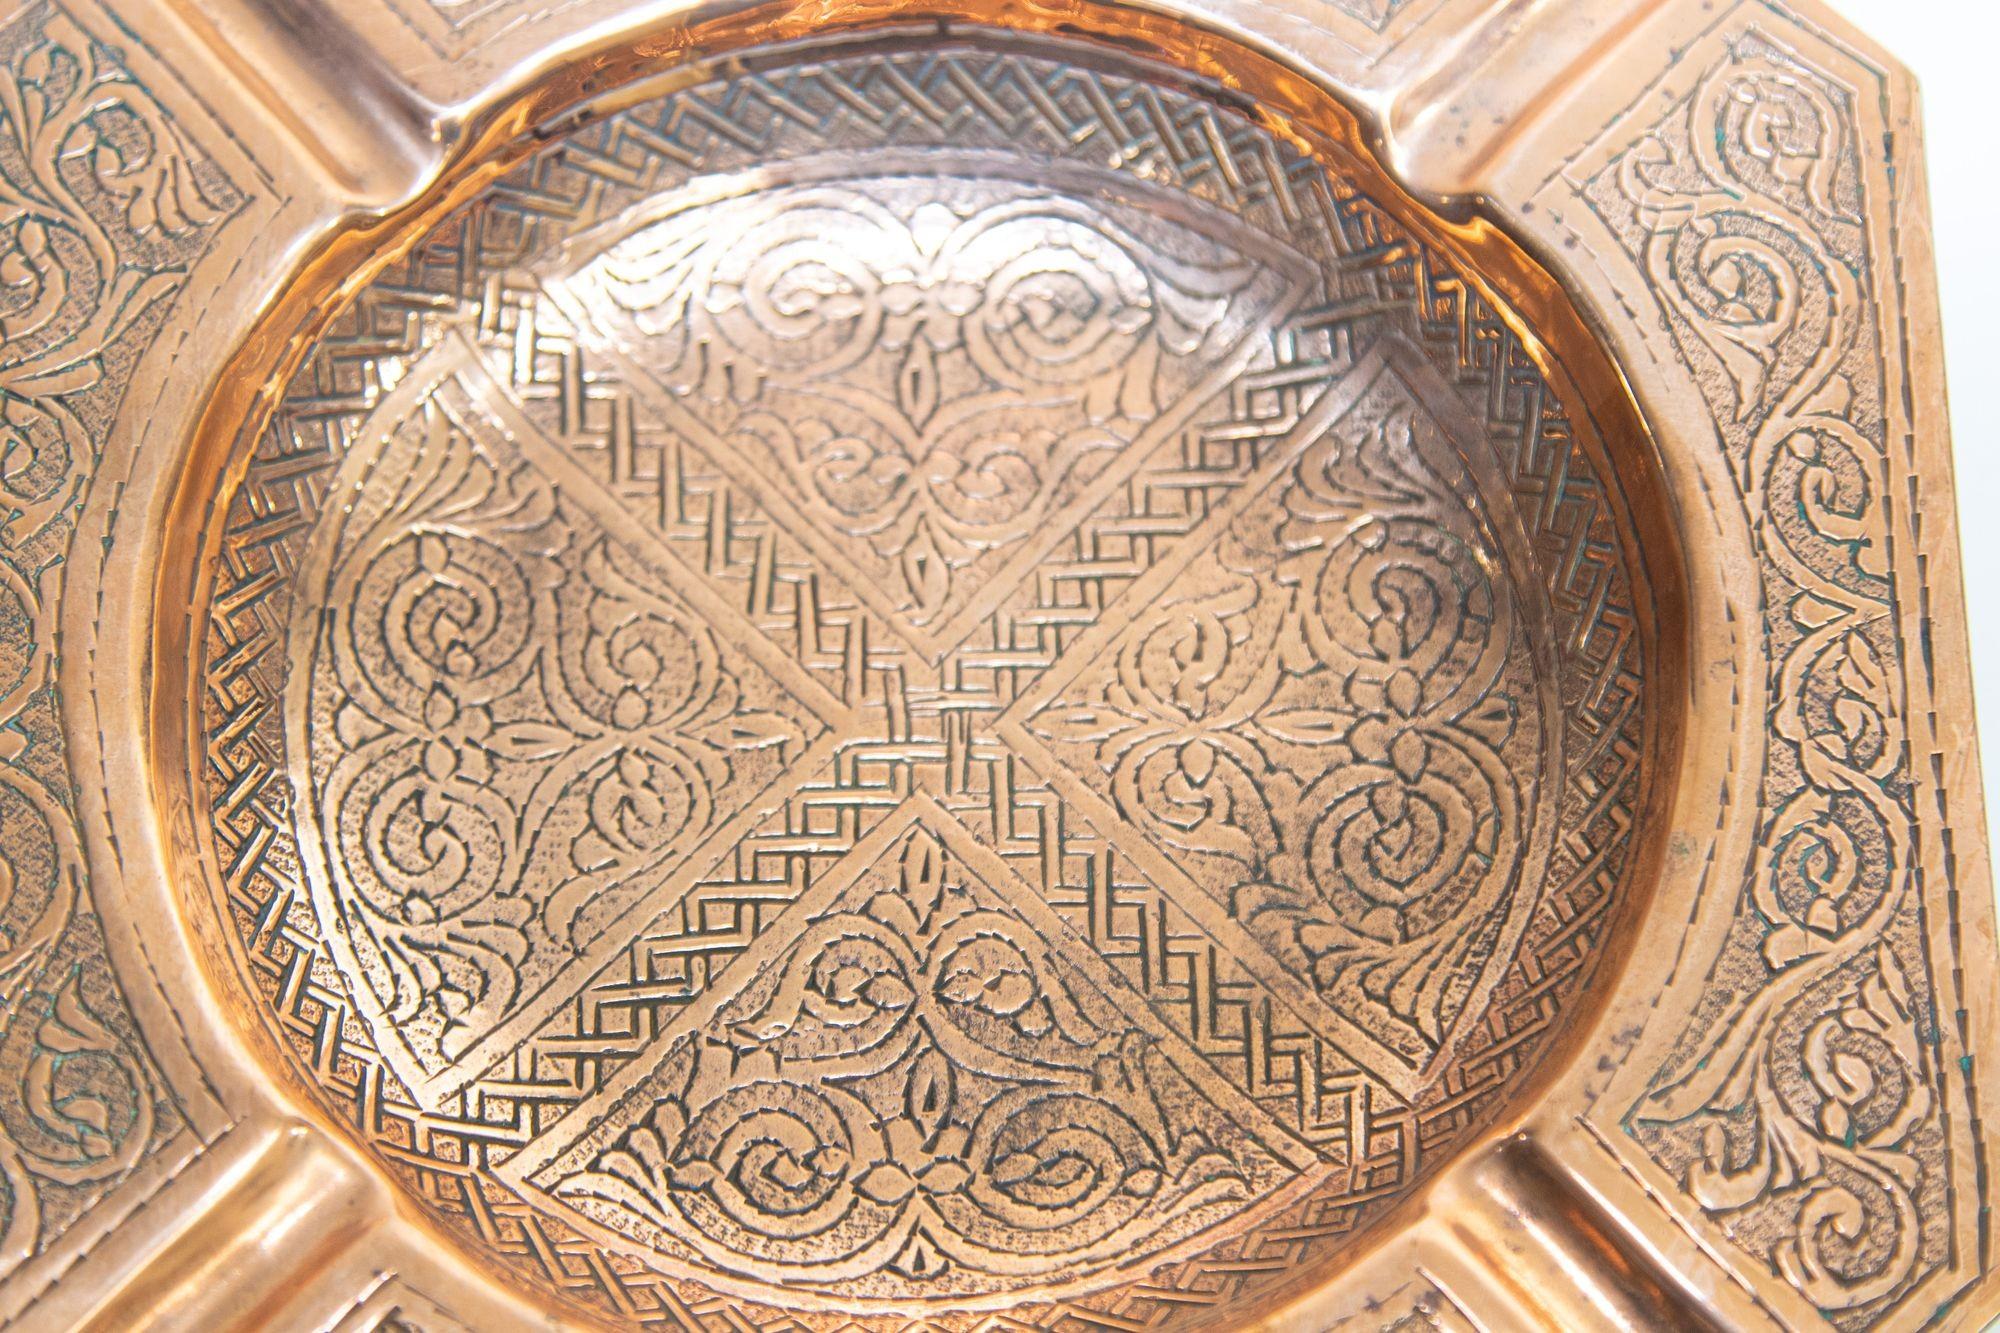 Engraved Moroccan Vintage Hammered Copper Ashtray in Moorish Design Octagonal Dish 1950's